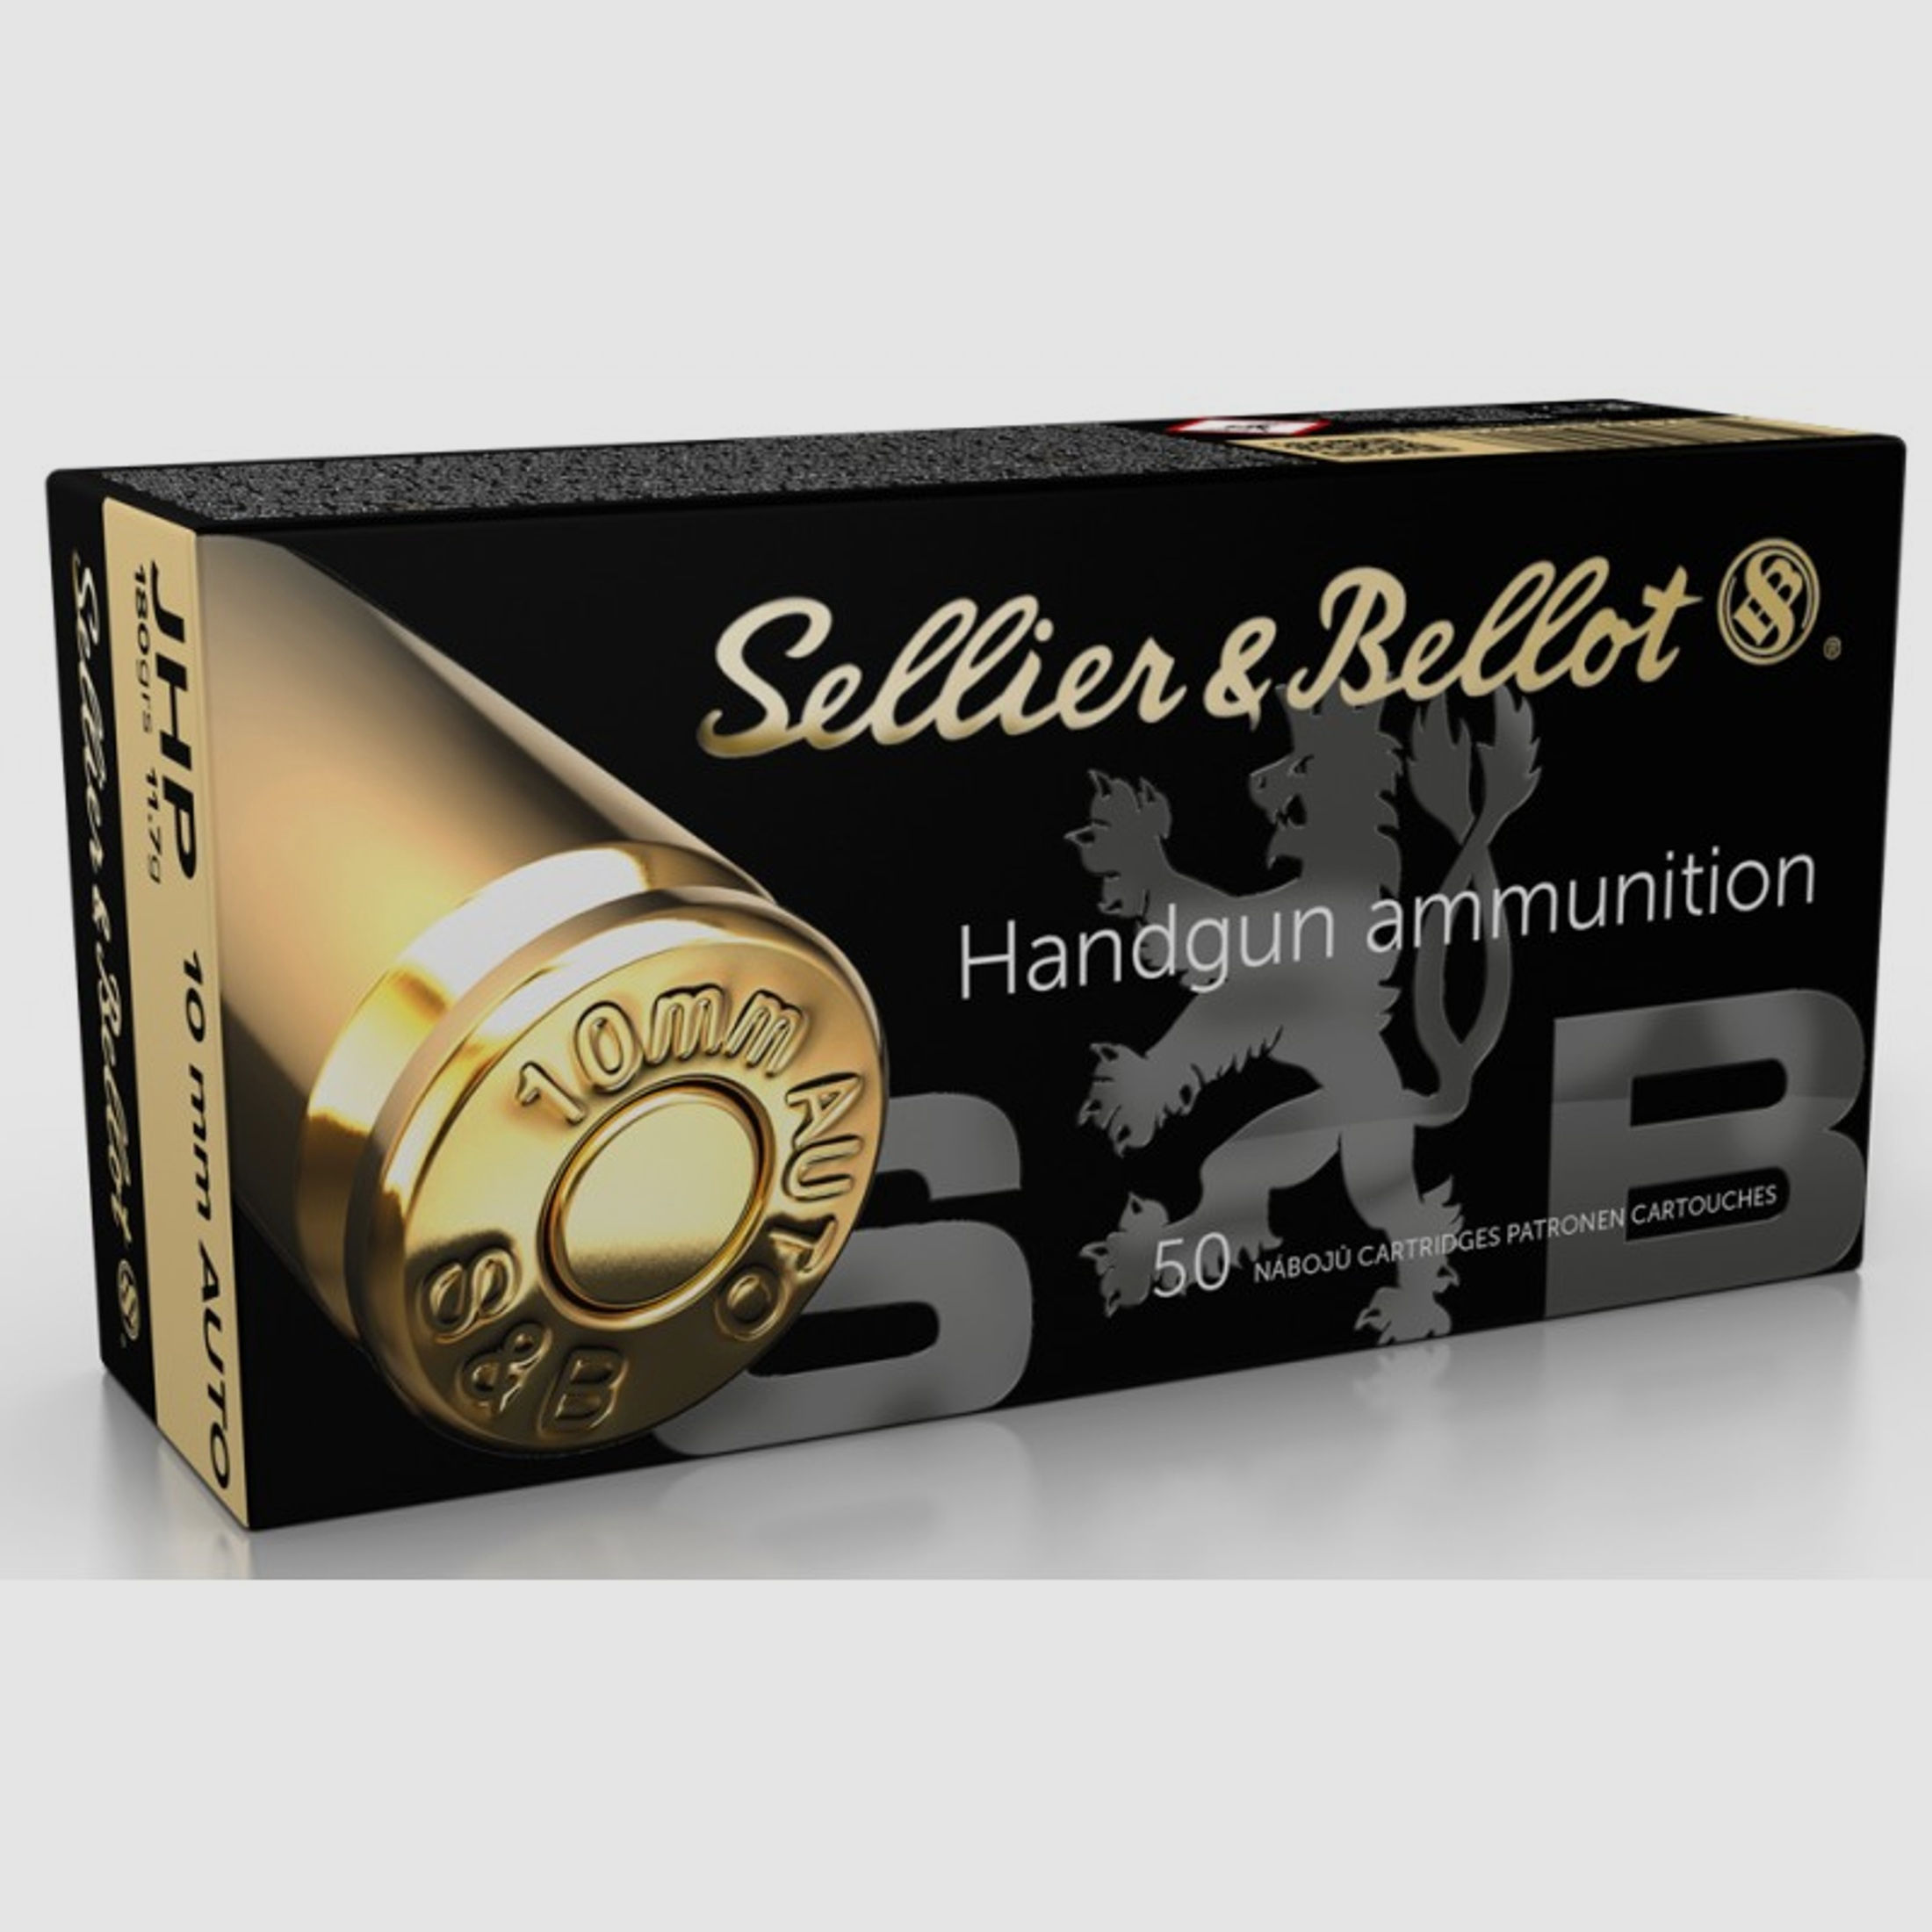 Sellier & Bellot 10 mm Auto JHP 11,7g/180grs.